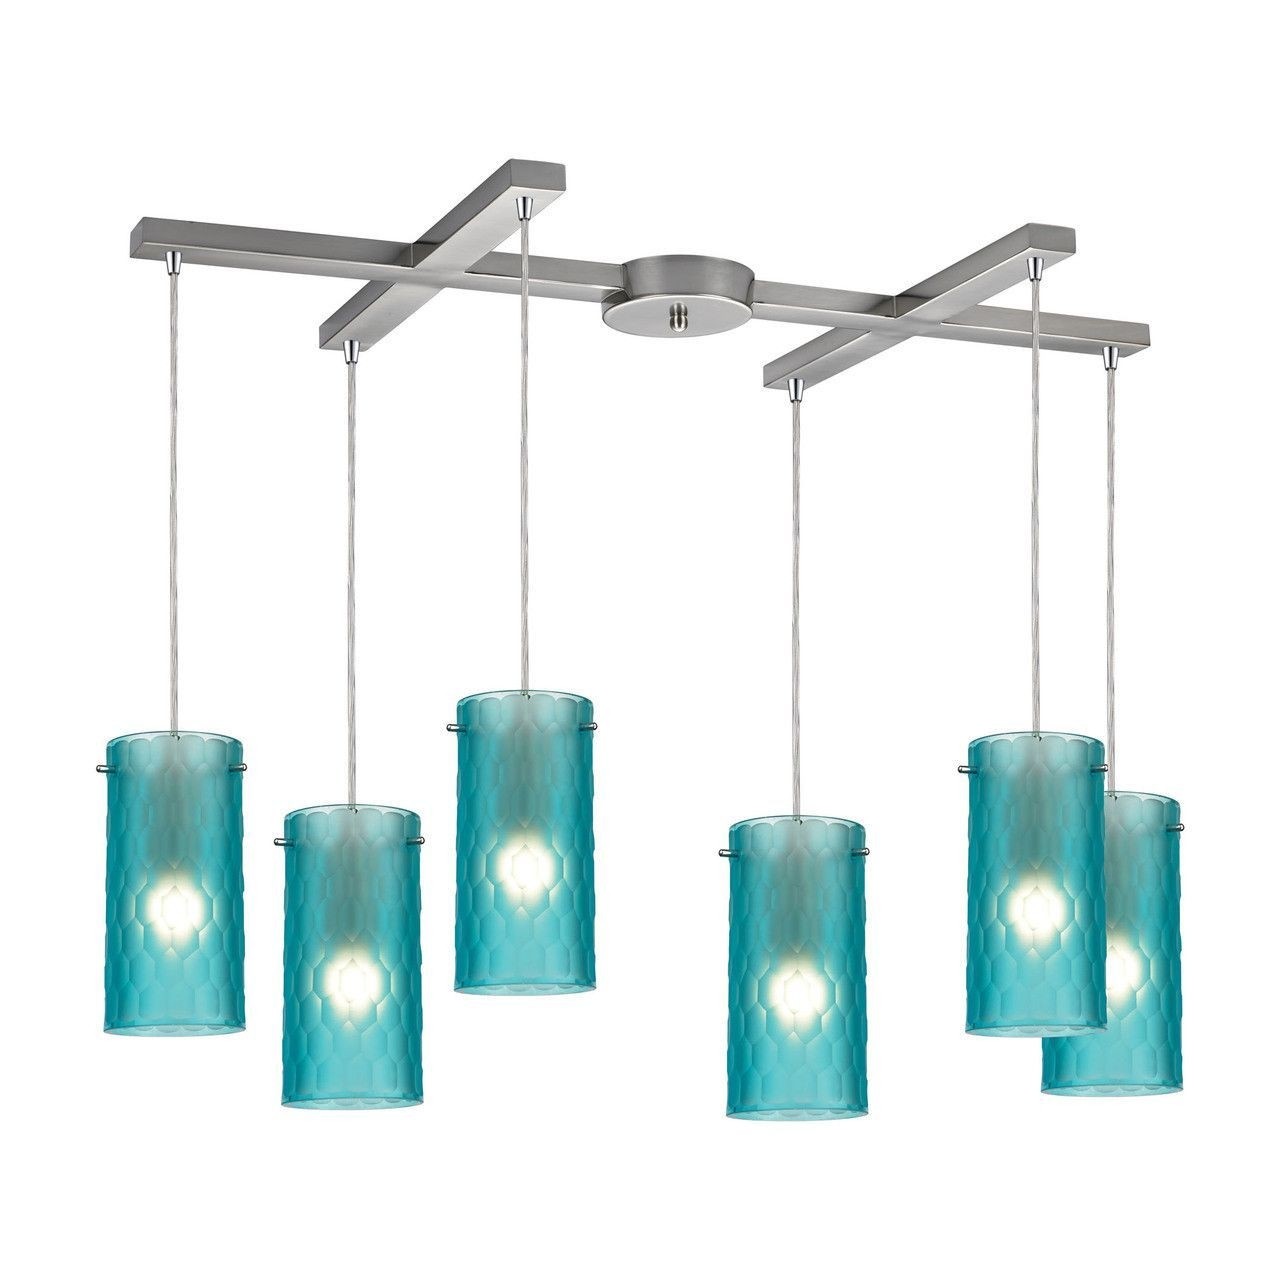 Elk Lighting 10243/6FA Synthesis - Six Light Pendant, Satin Nickel Finish with Frosted Aqua Glass